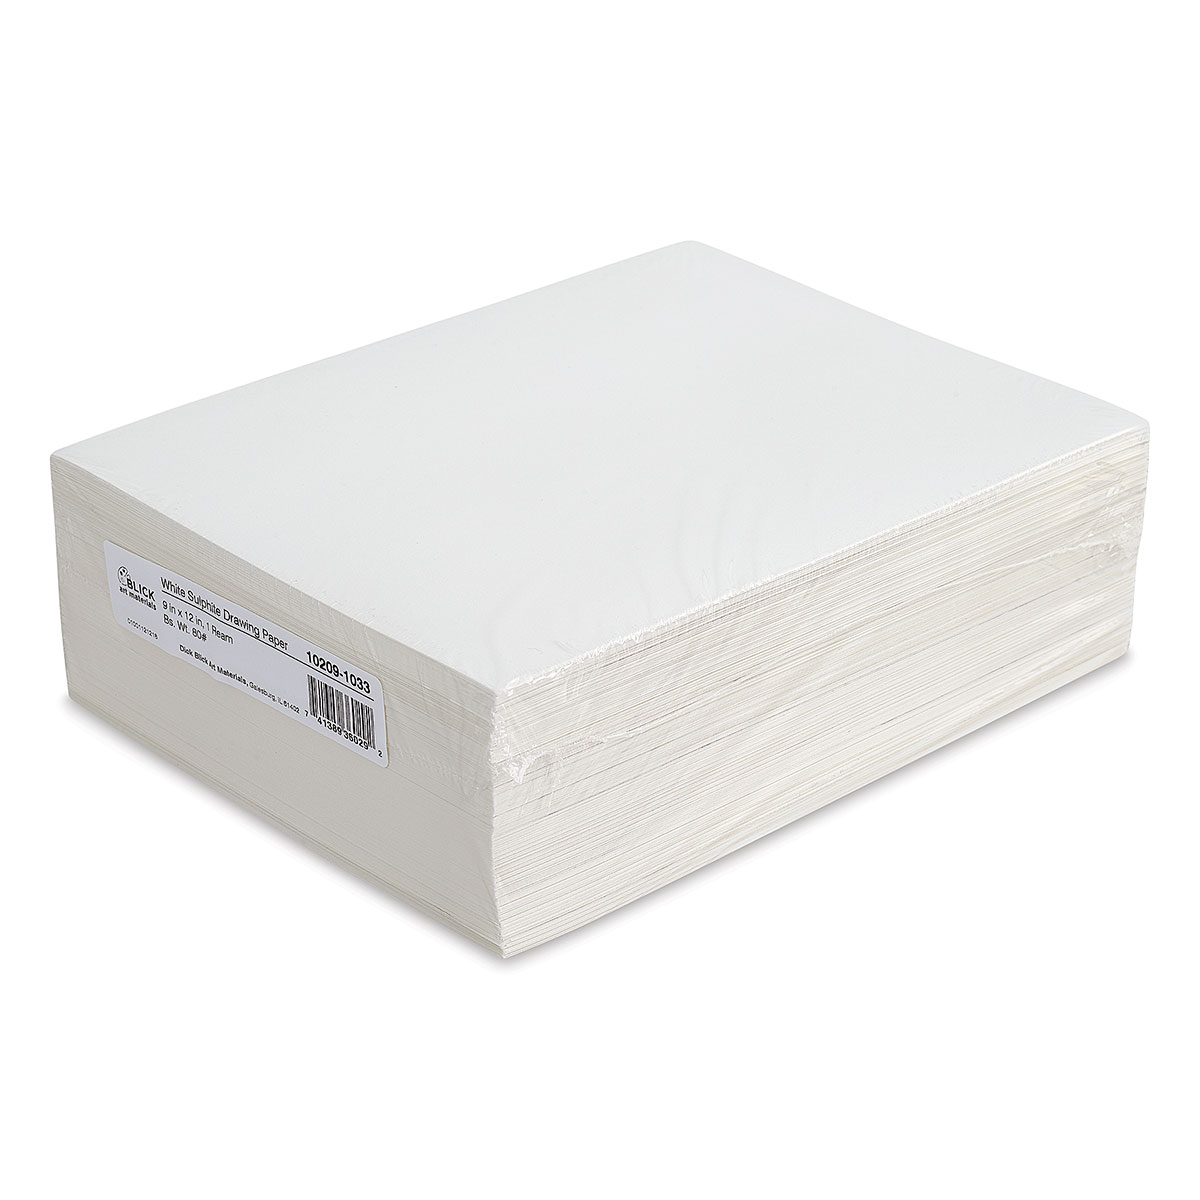 Blick Sulphite Drawing Papers 9" x 12", White, 500 Sheets, 80 lb